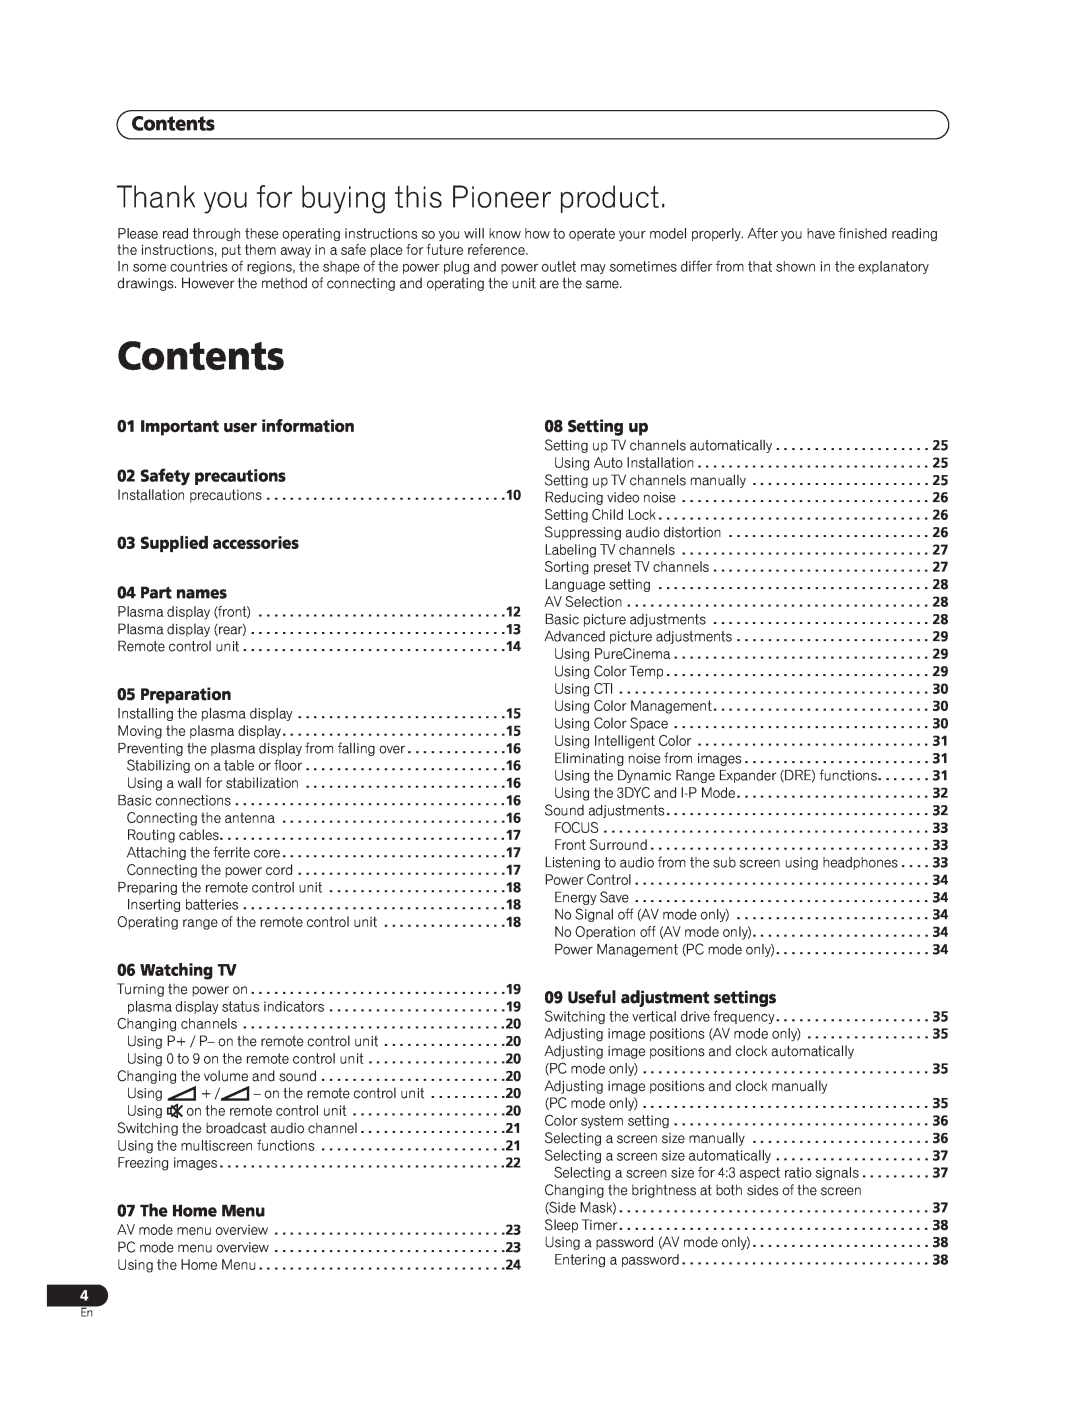 Pioneer PDP-427XG Contents, Thank you for buying this Pioneer product, Important user information 02 Safety precautions 